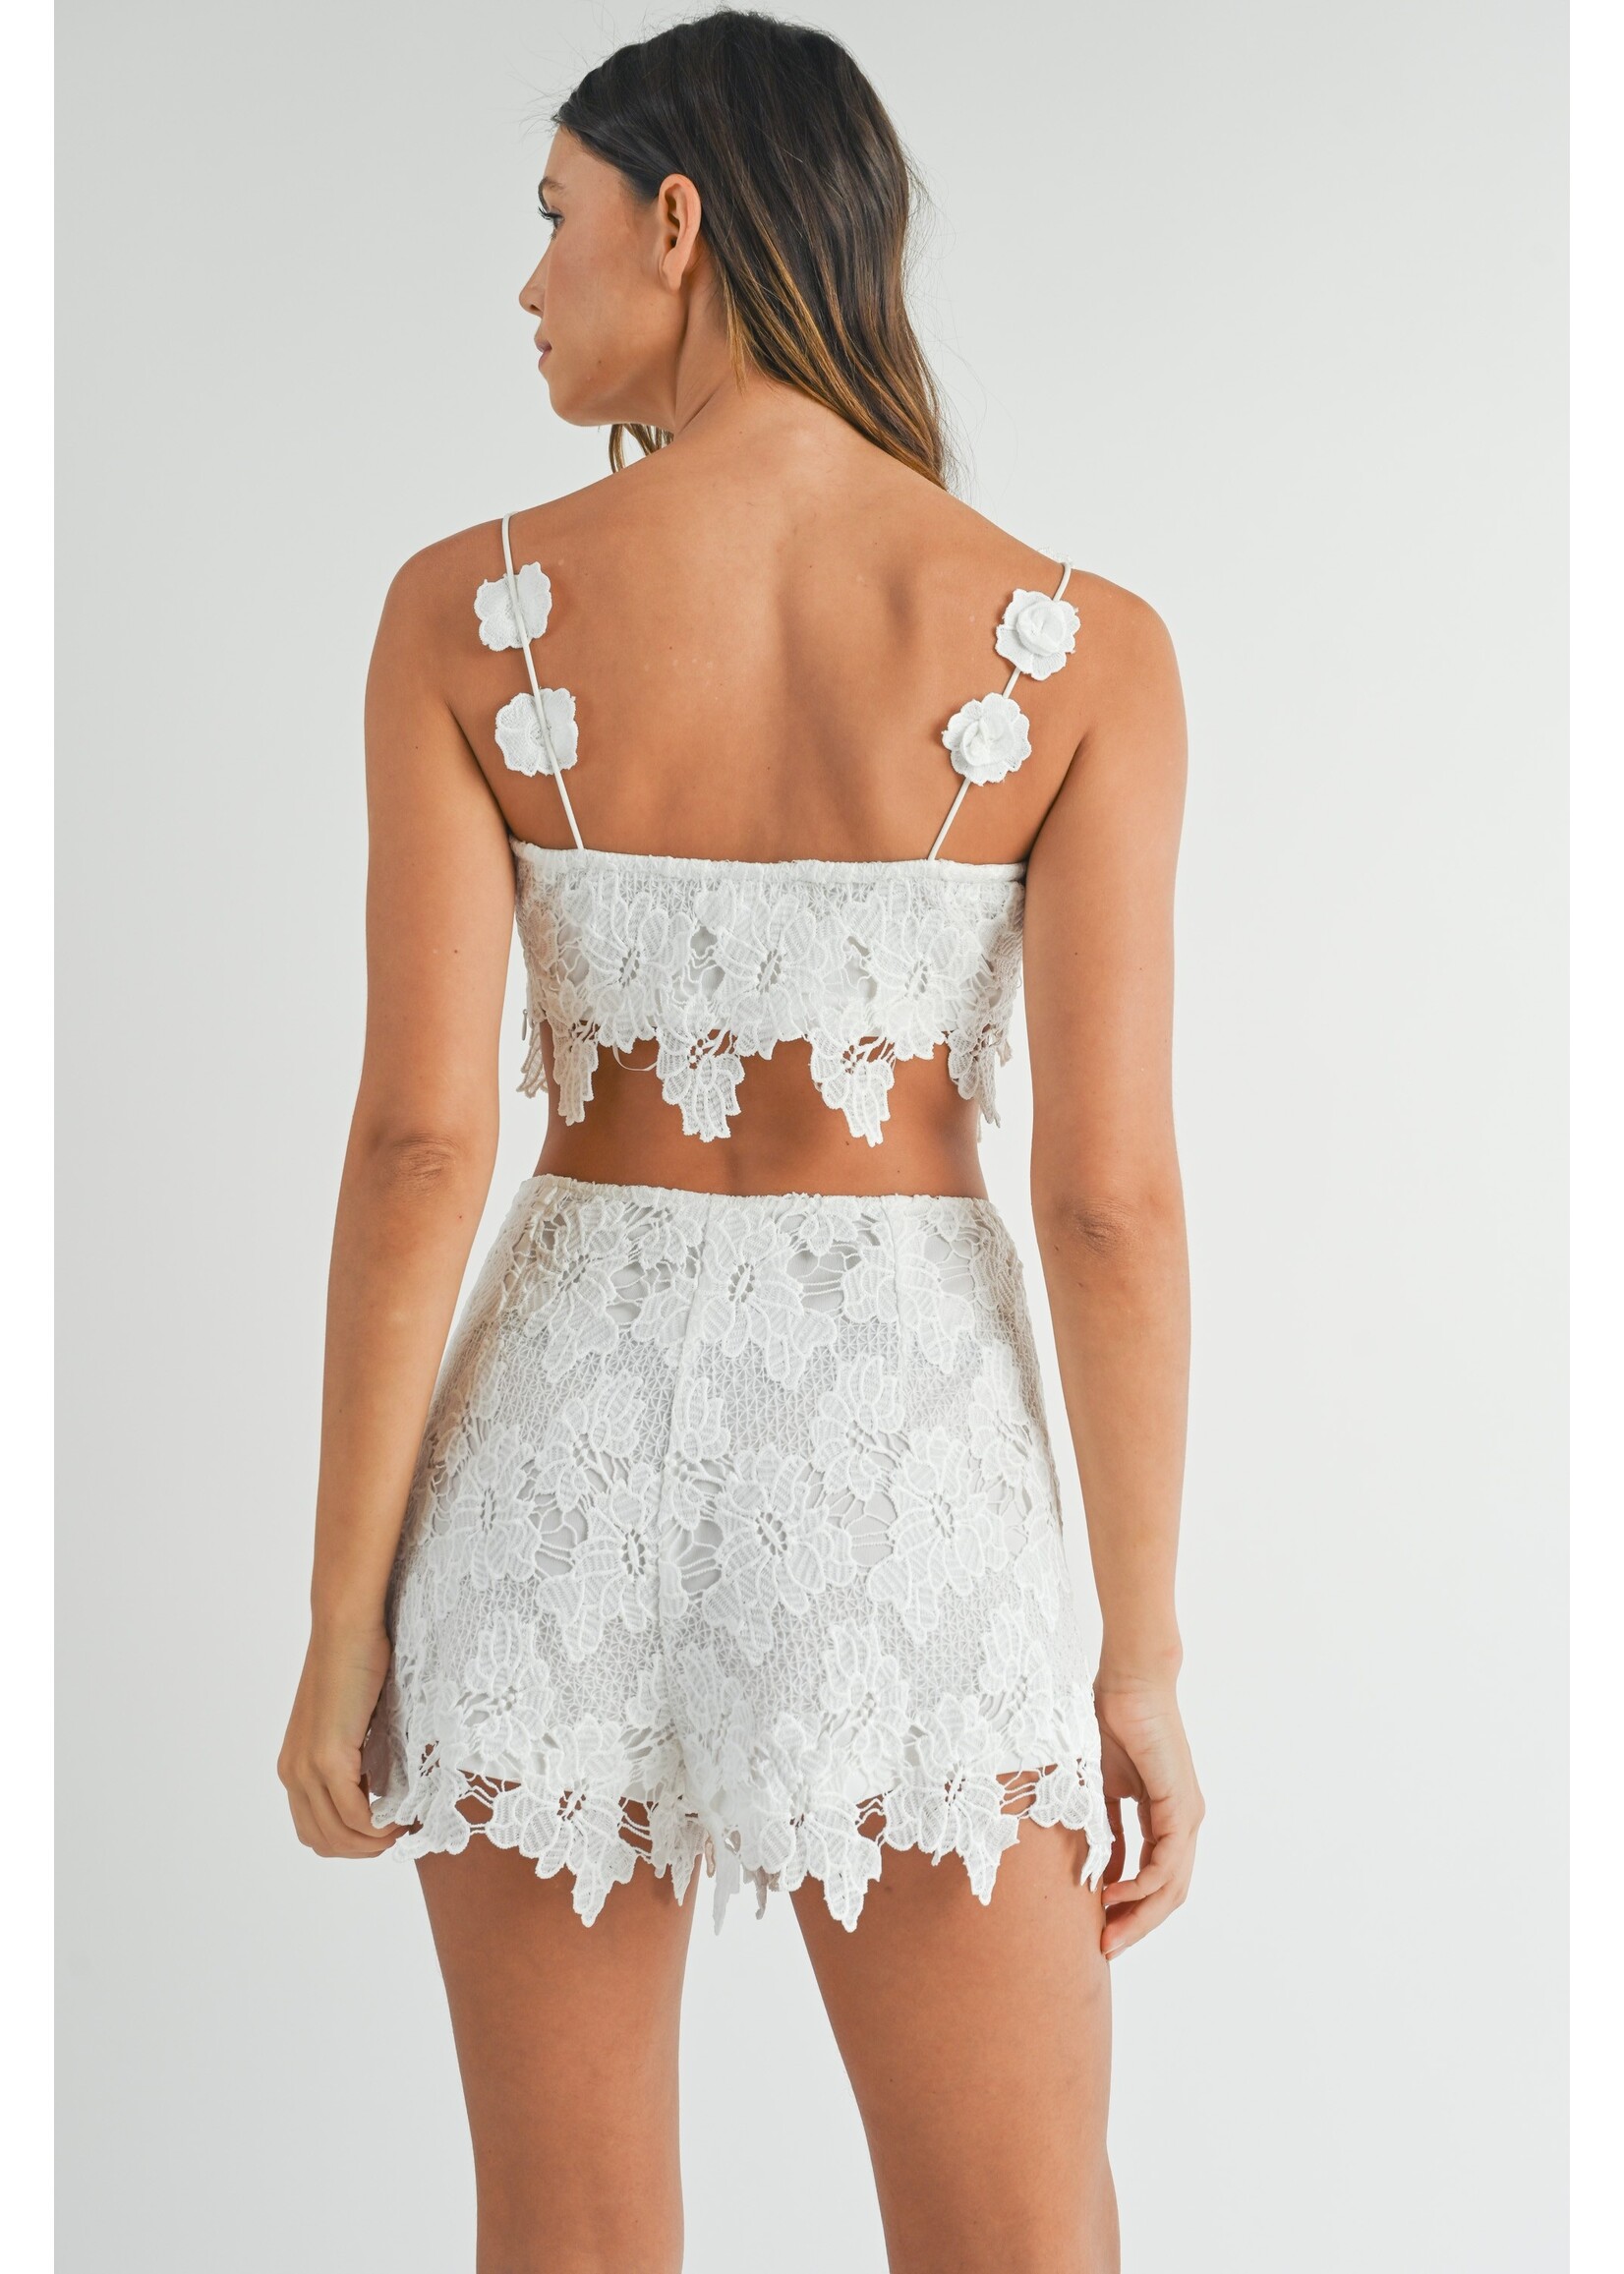 Mable Crochet Lace Crop Top and Shorts Set - MST7840